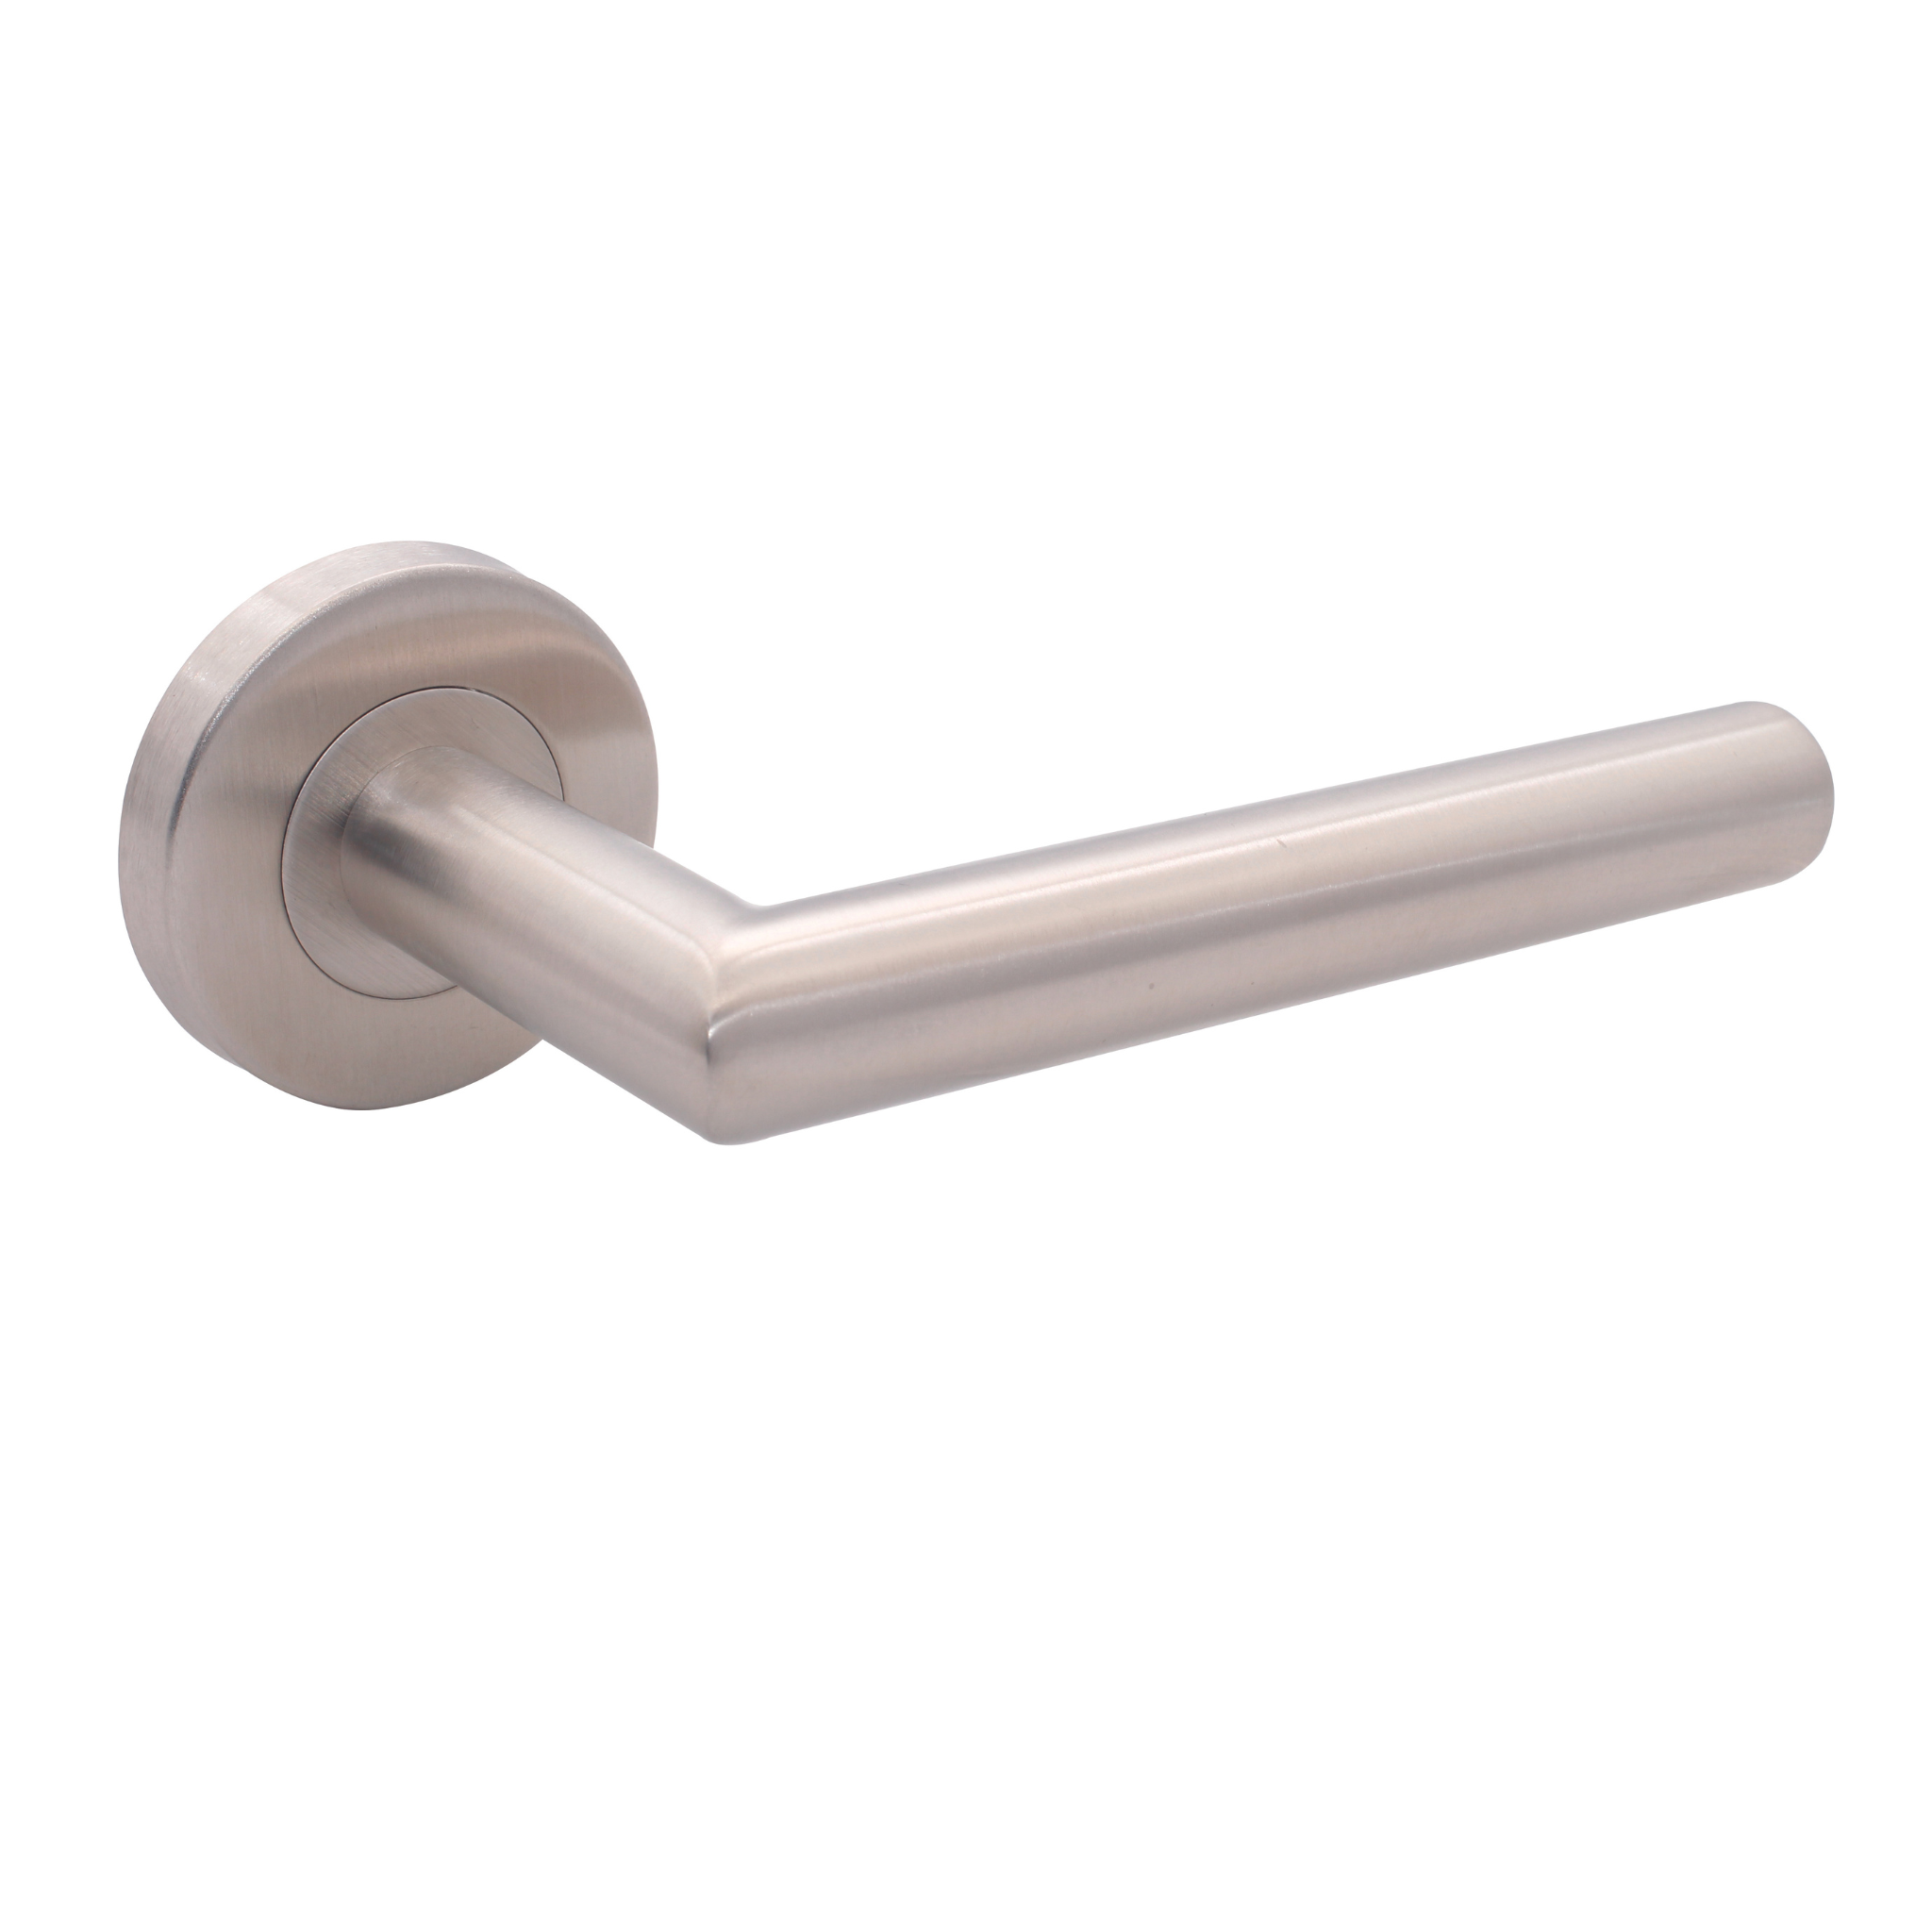 FT02.R._.TR, Lever Handles, Tubular, On Round Rose, With Escutcheons, 134mm (l), Stainless Steel with Tarnish Resistant, CISA